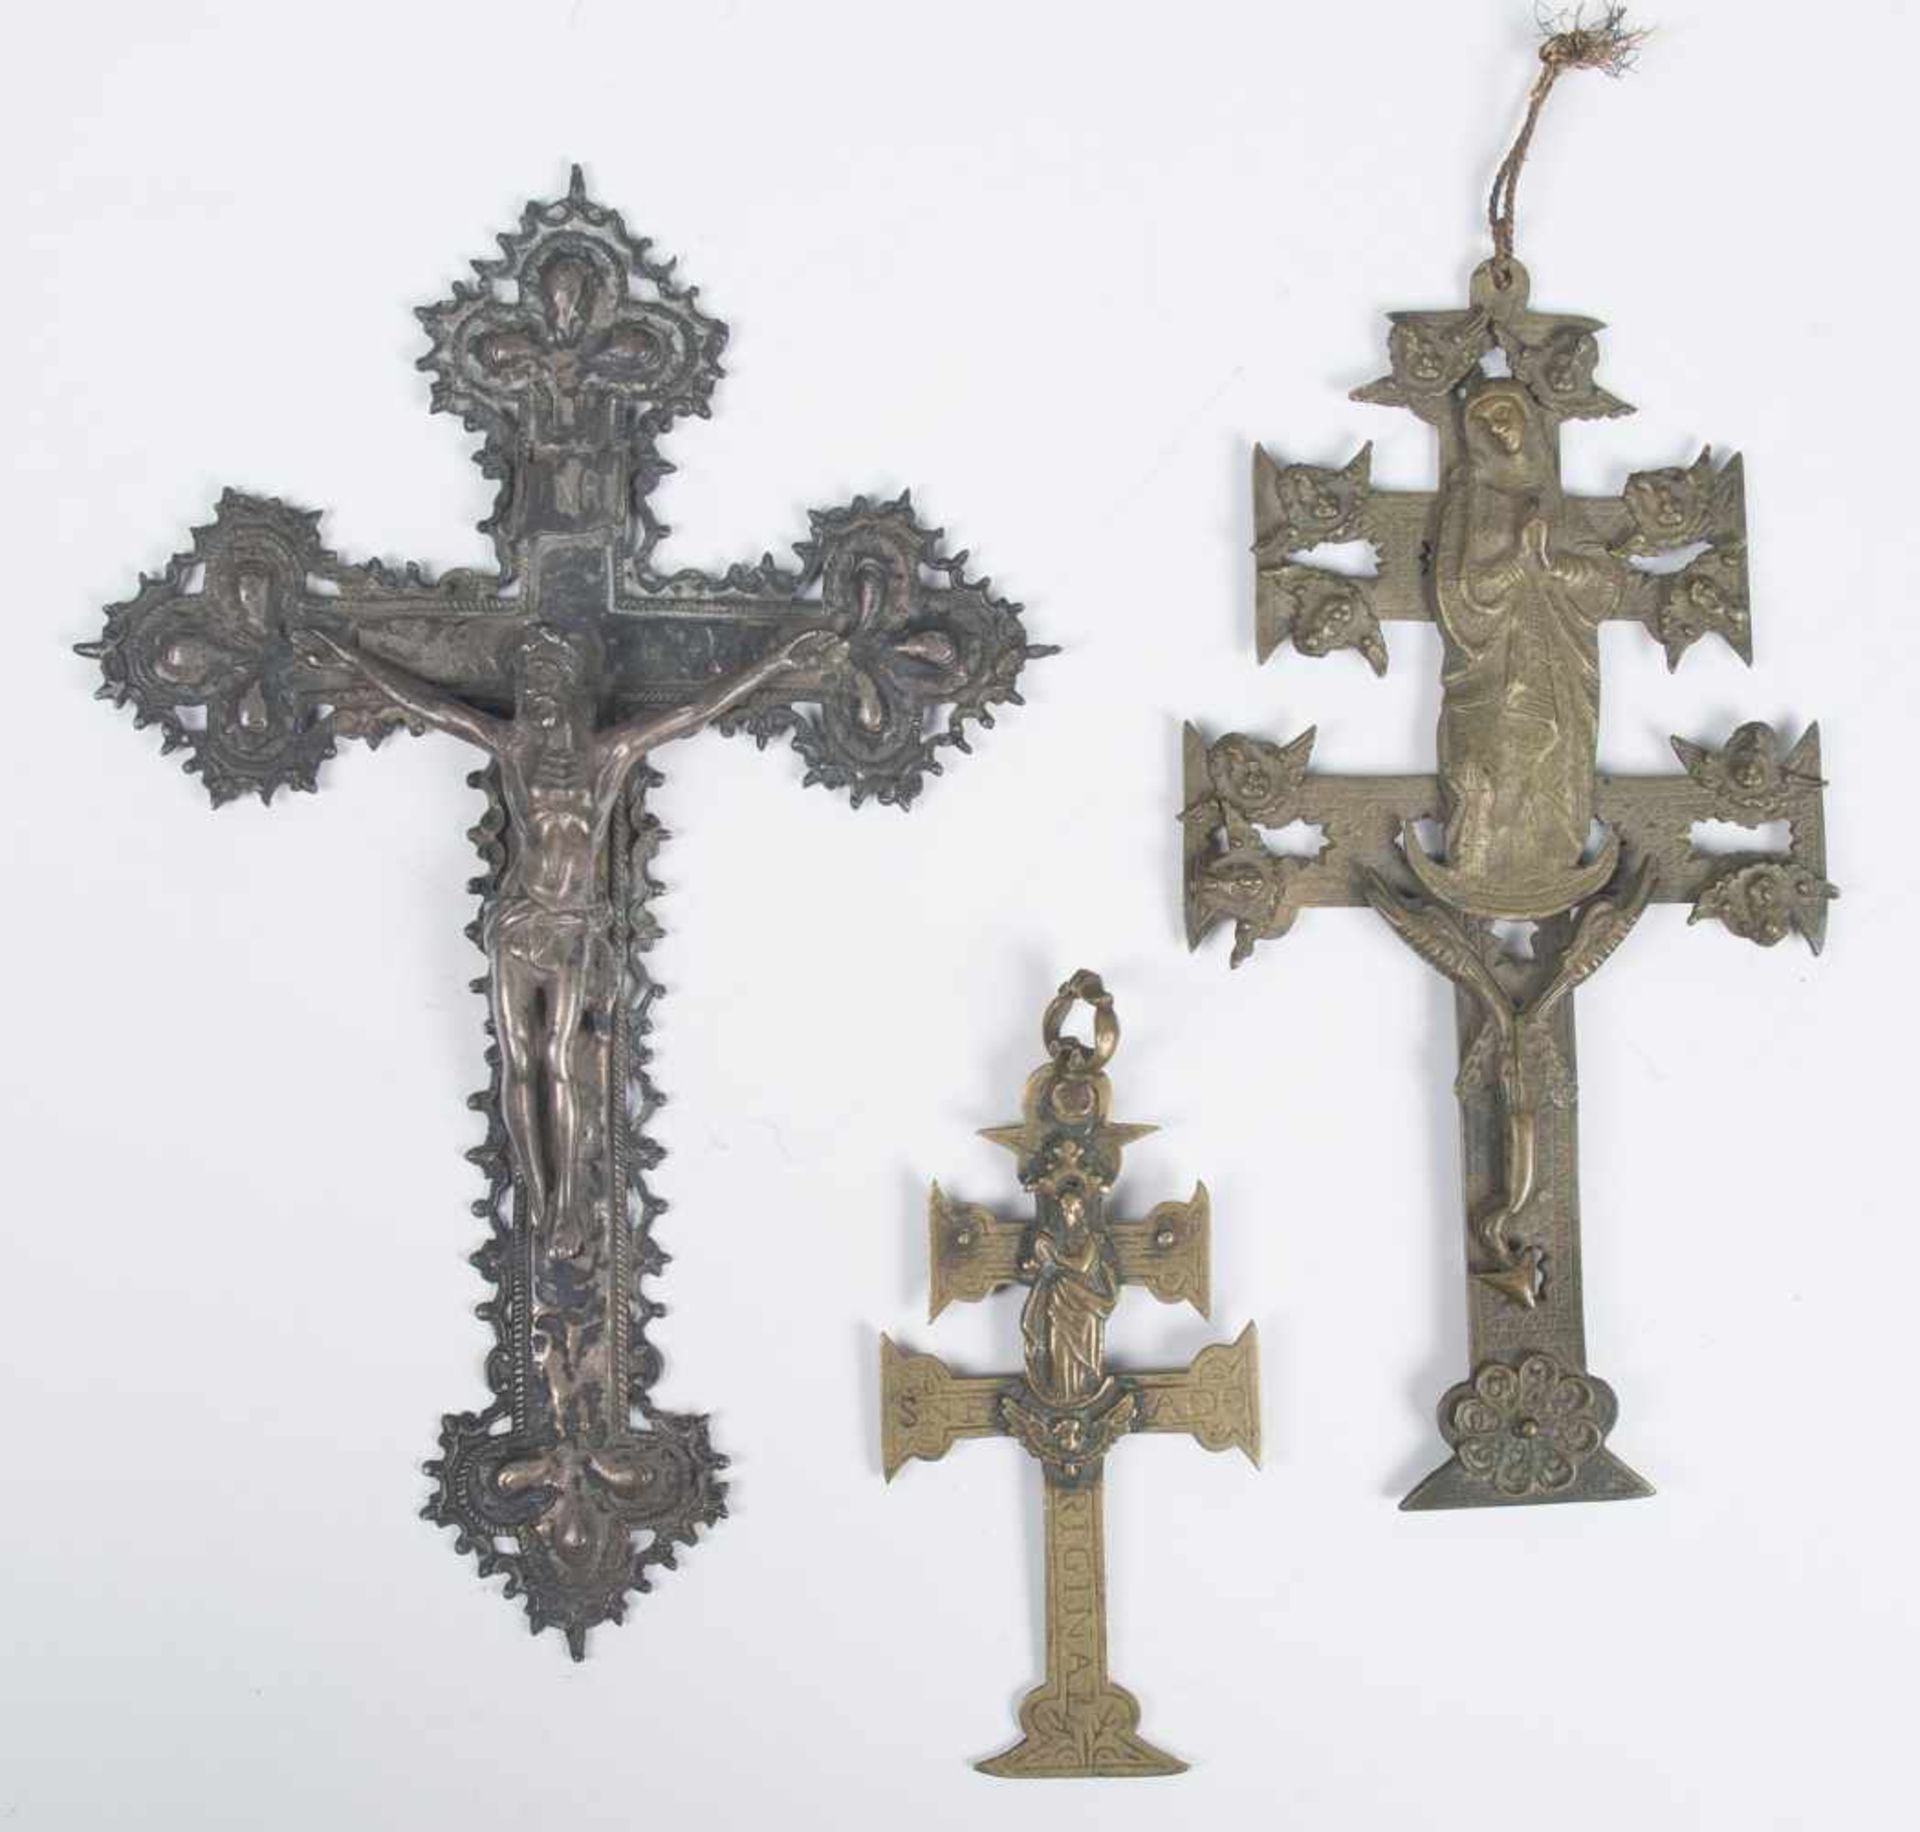 Collection of three crosses. Two are bronze Caravaca crosses and the third is made of silver. 18th –